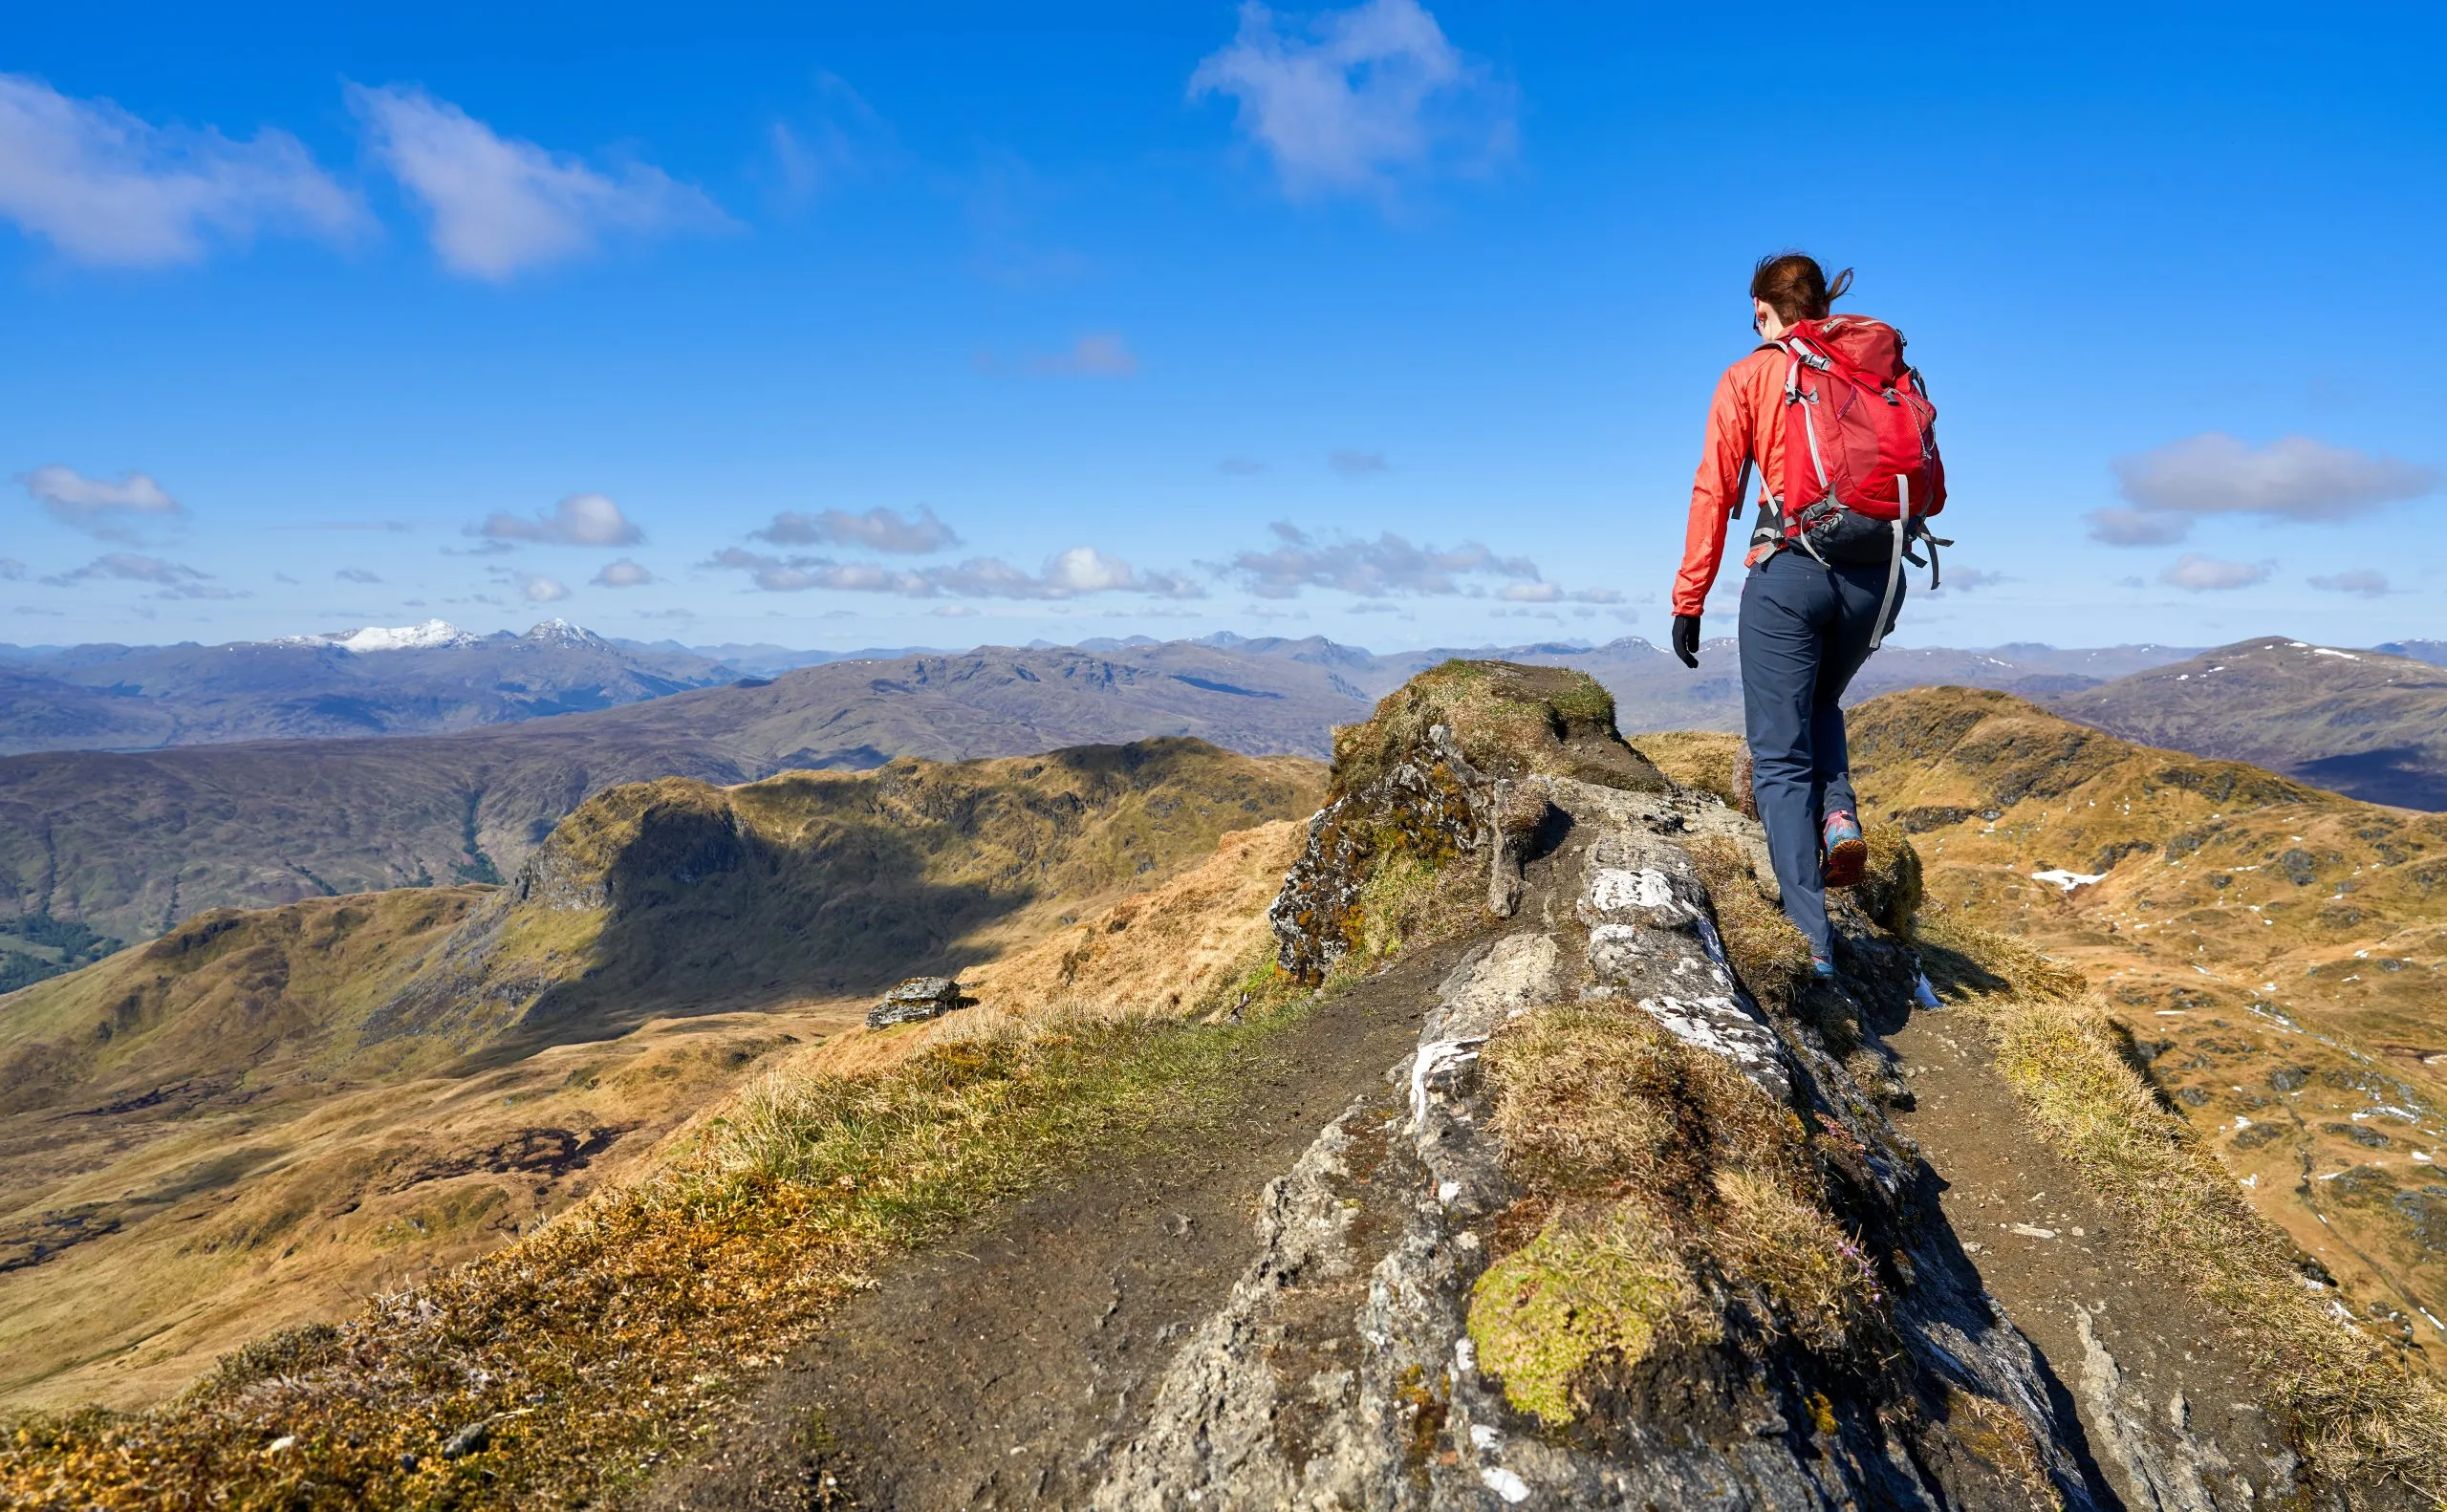 A hiker walking over the mountain summit ridge of Meall Garbh towards the top of Beinn nan Eachan in the Scottish Highlands, UK Landscapes.